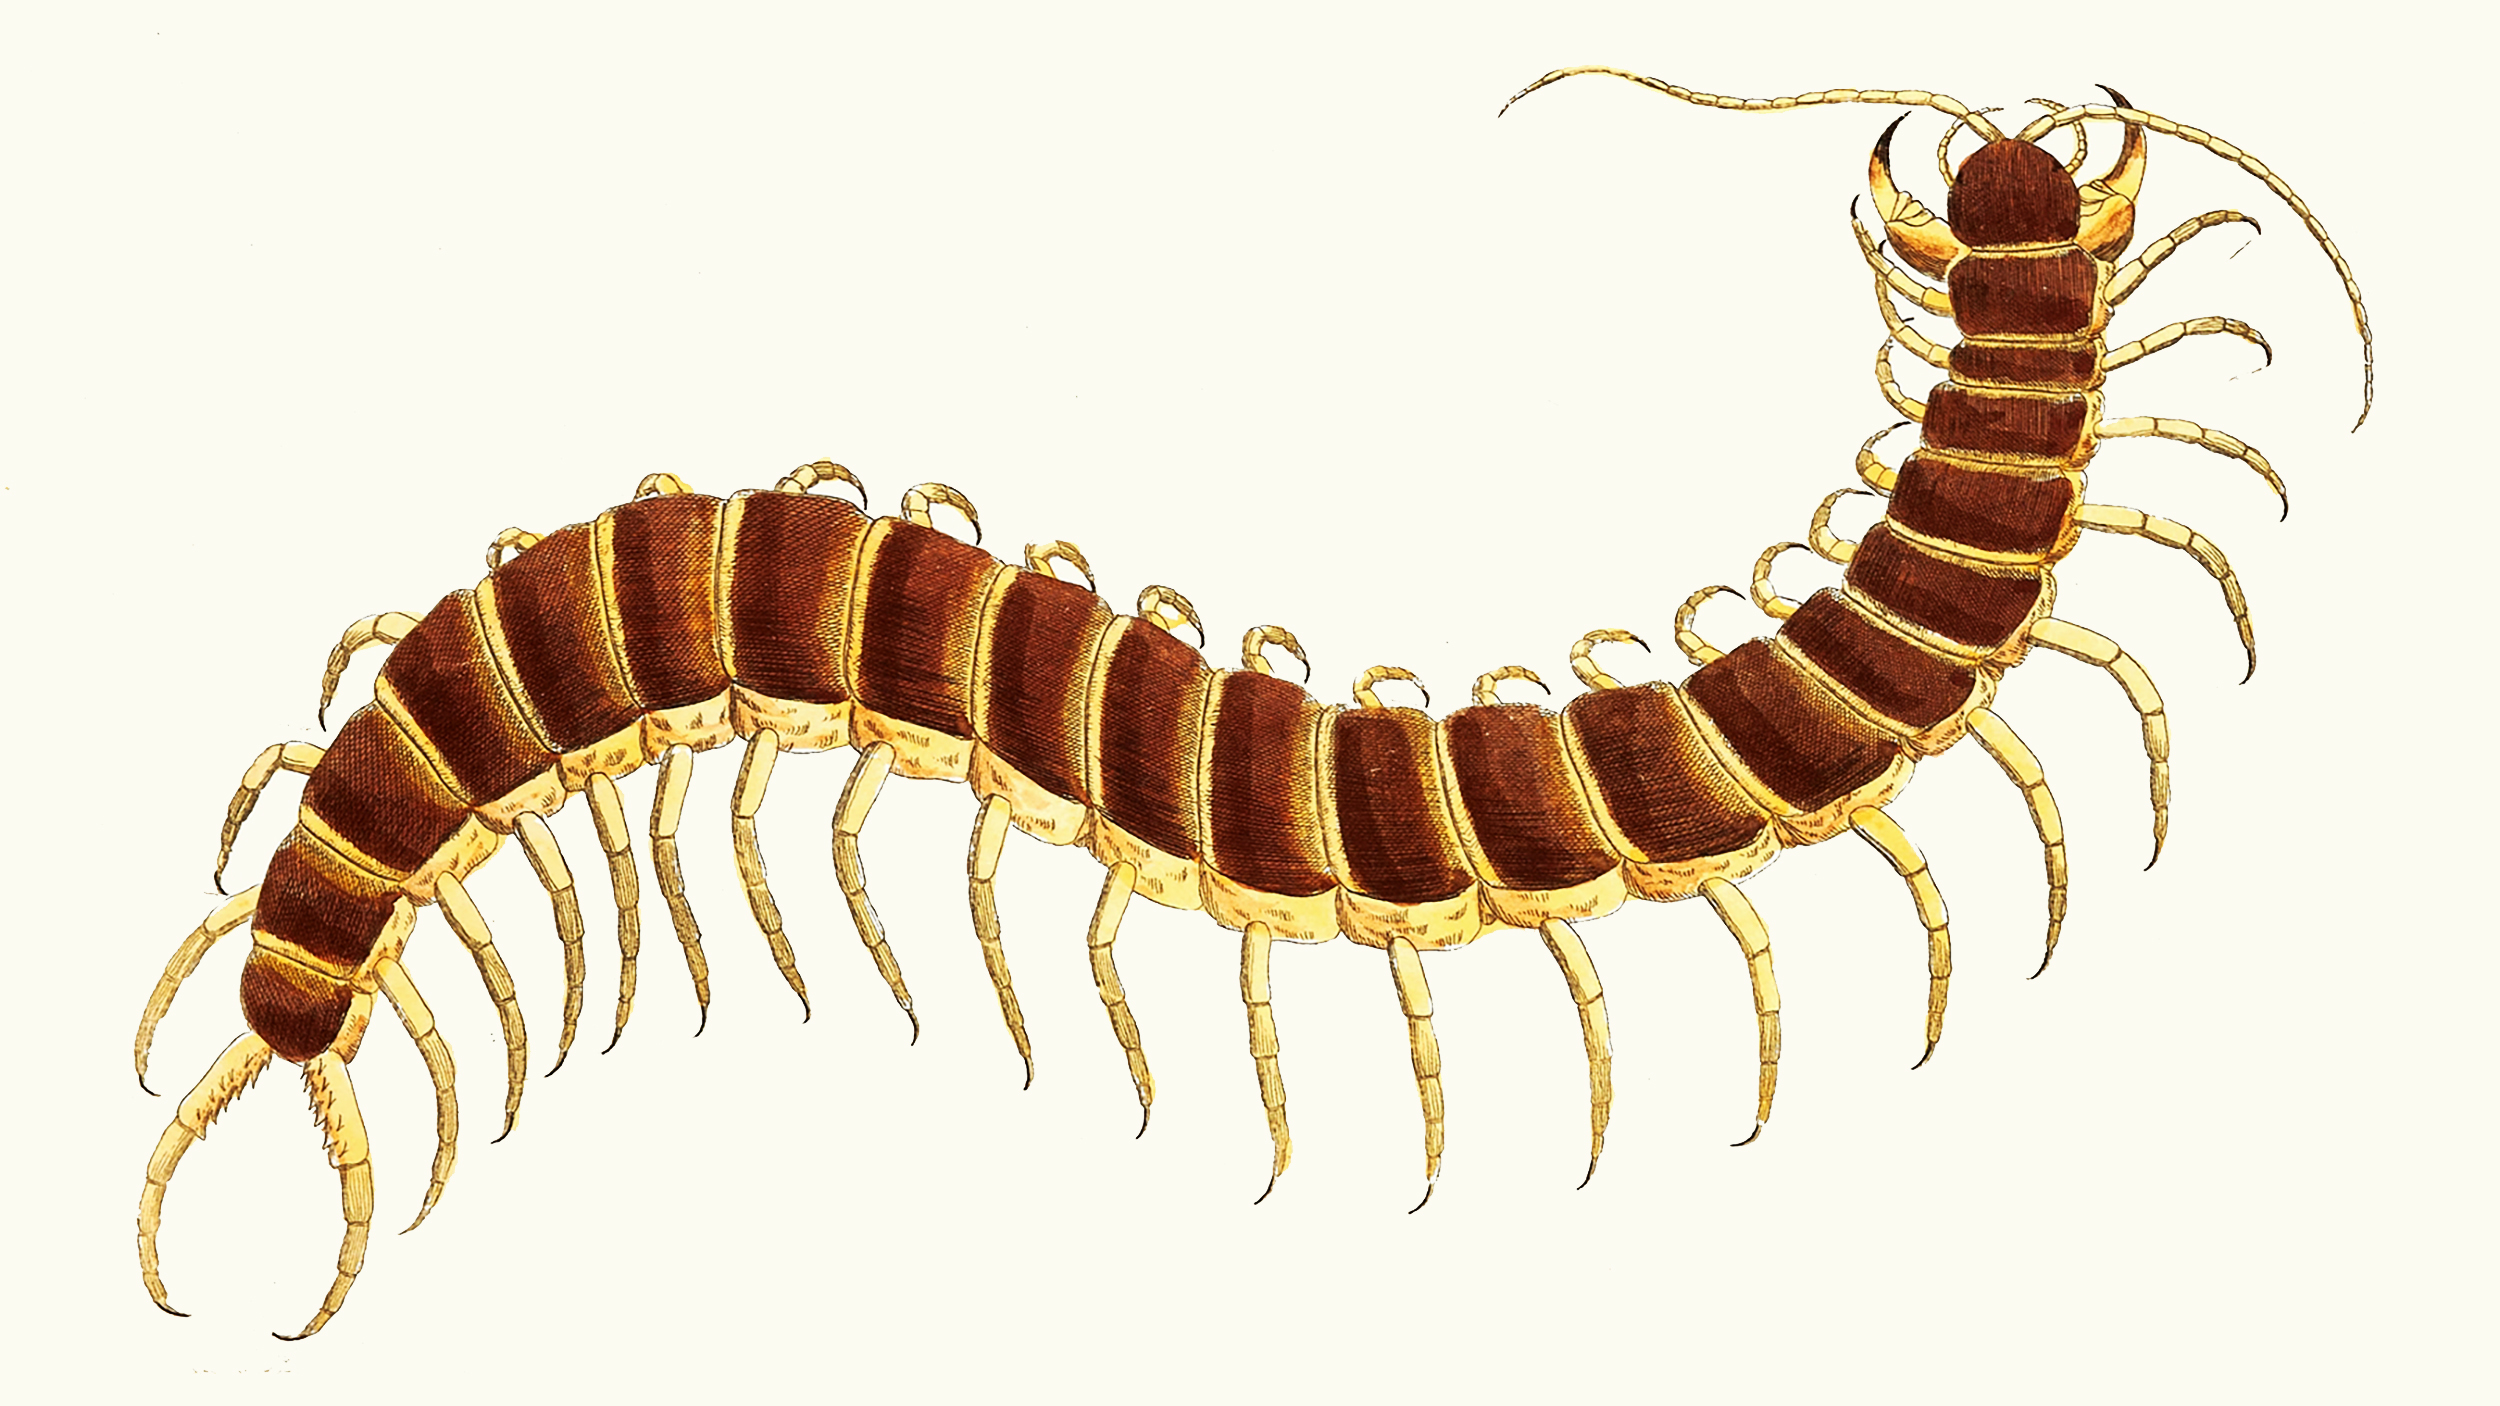 An intricate illustration featuring the centipede's dilemma on a blank white canvas.